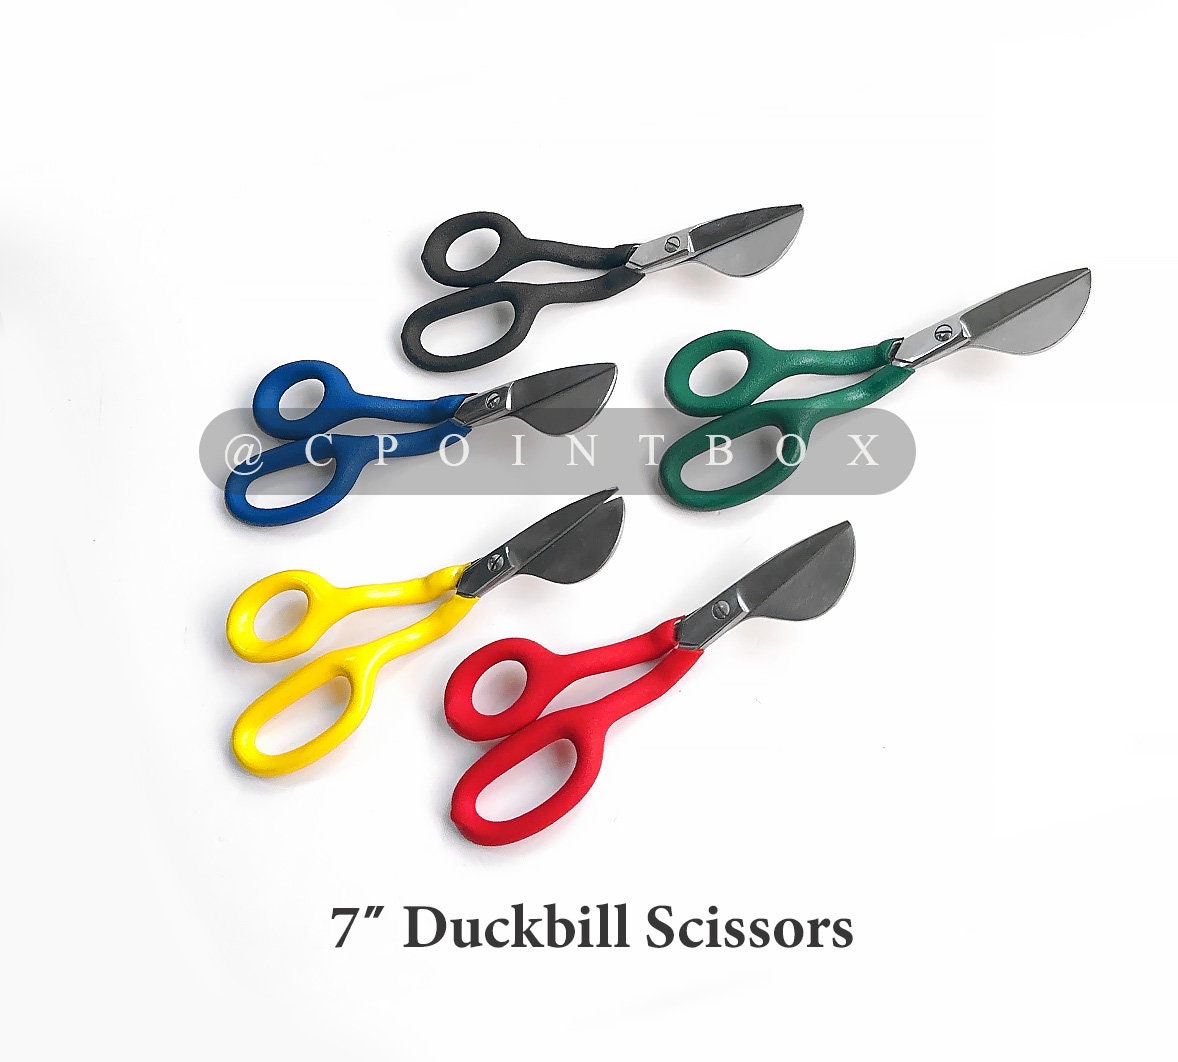 Scissors 24 Cm Fabric Scissors Tailor's Scissors, Fabric Scissors, Sharp  Stainless Steel Blade, for Cutting, Clothing, Leather, Jeans, Sewing, Gift  